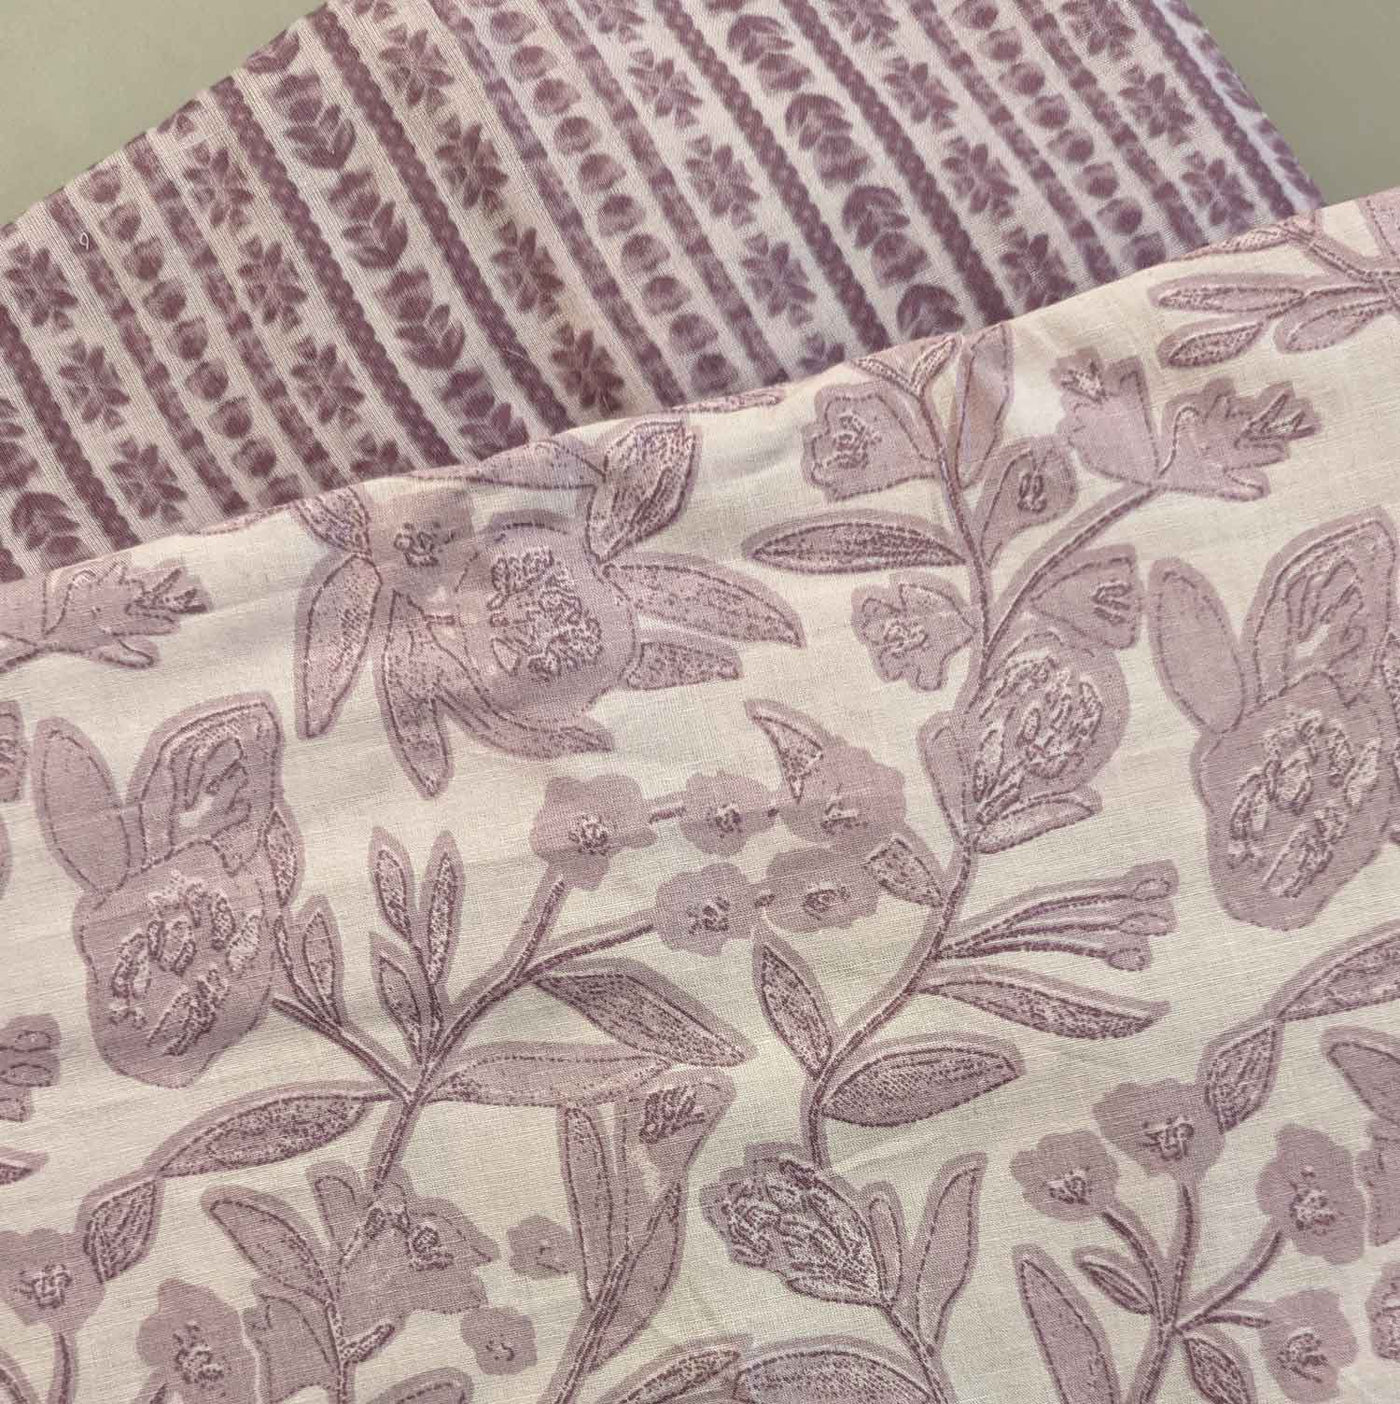 Pink & Cream Floral / Stripes Cotton Fabric Combo